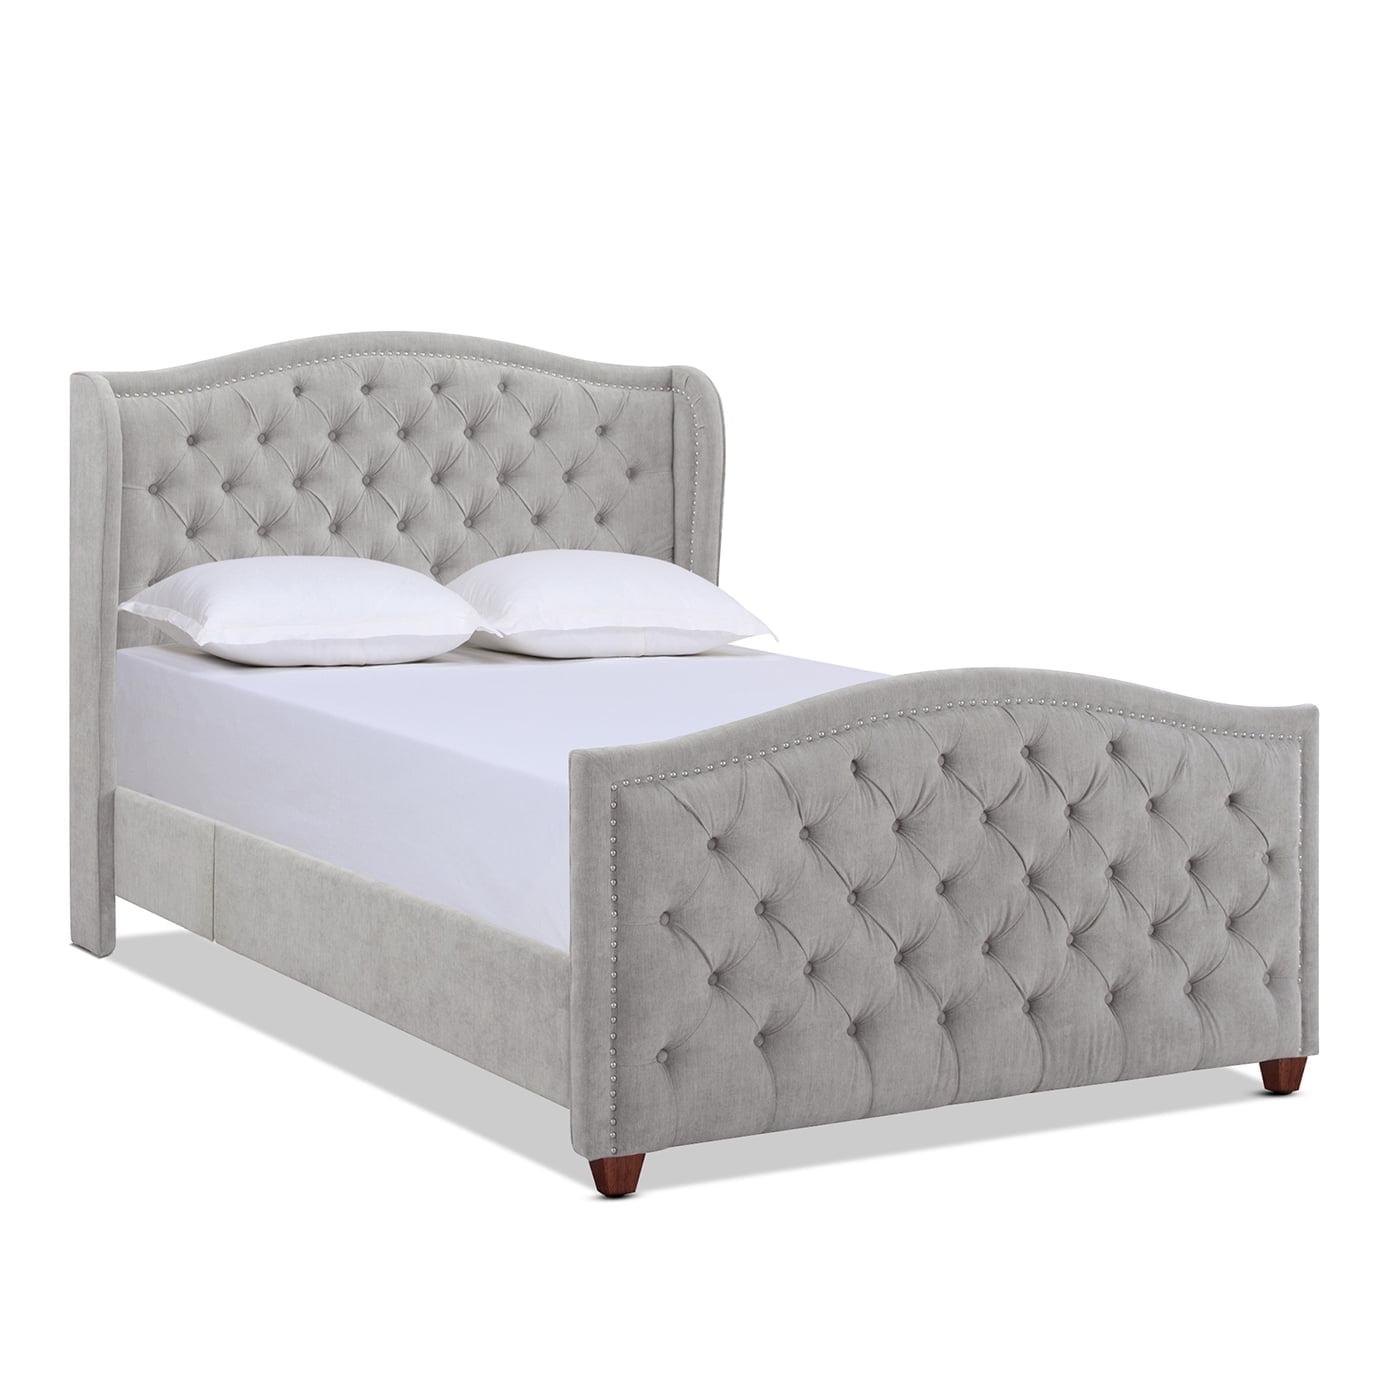 Marcella Queen Upholstered Bed with Tufted Headboard and Nailhead Trim, Silver Grey